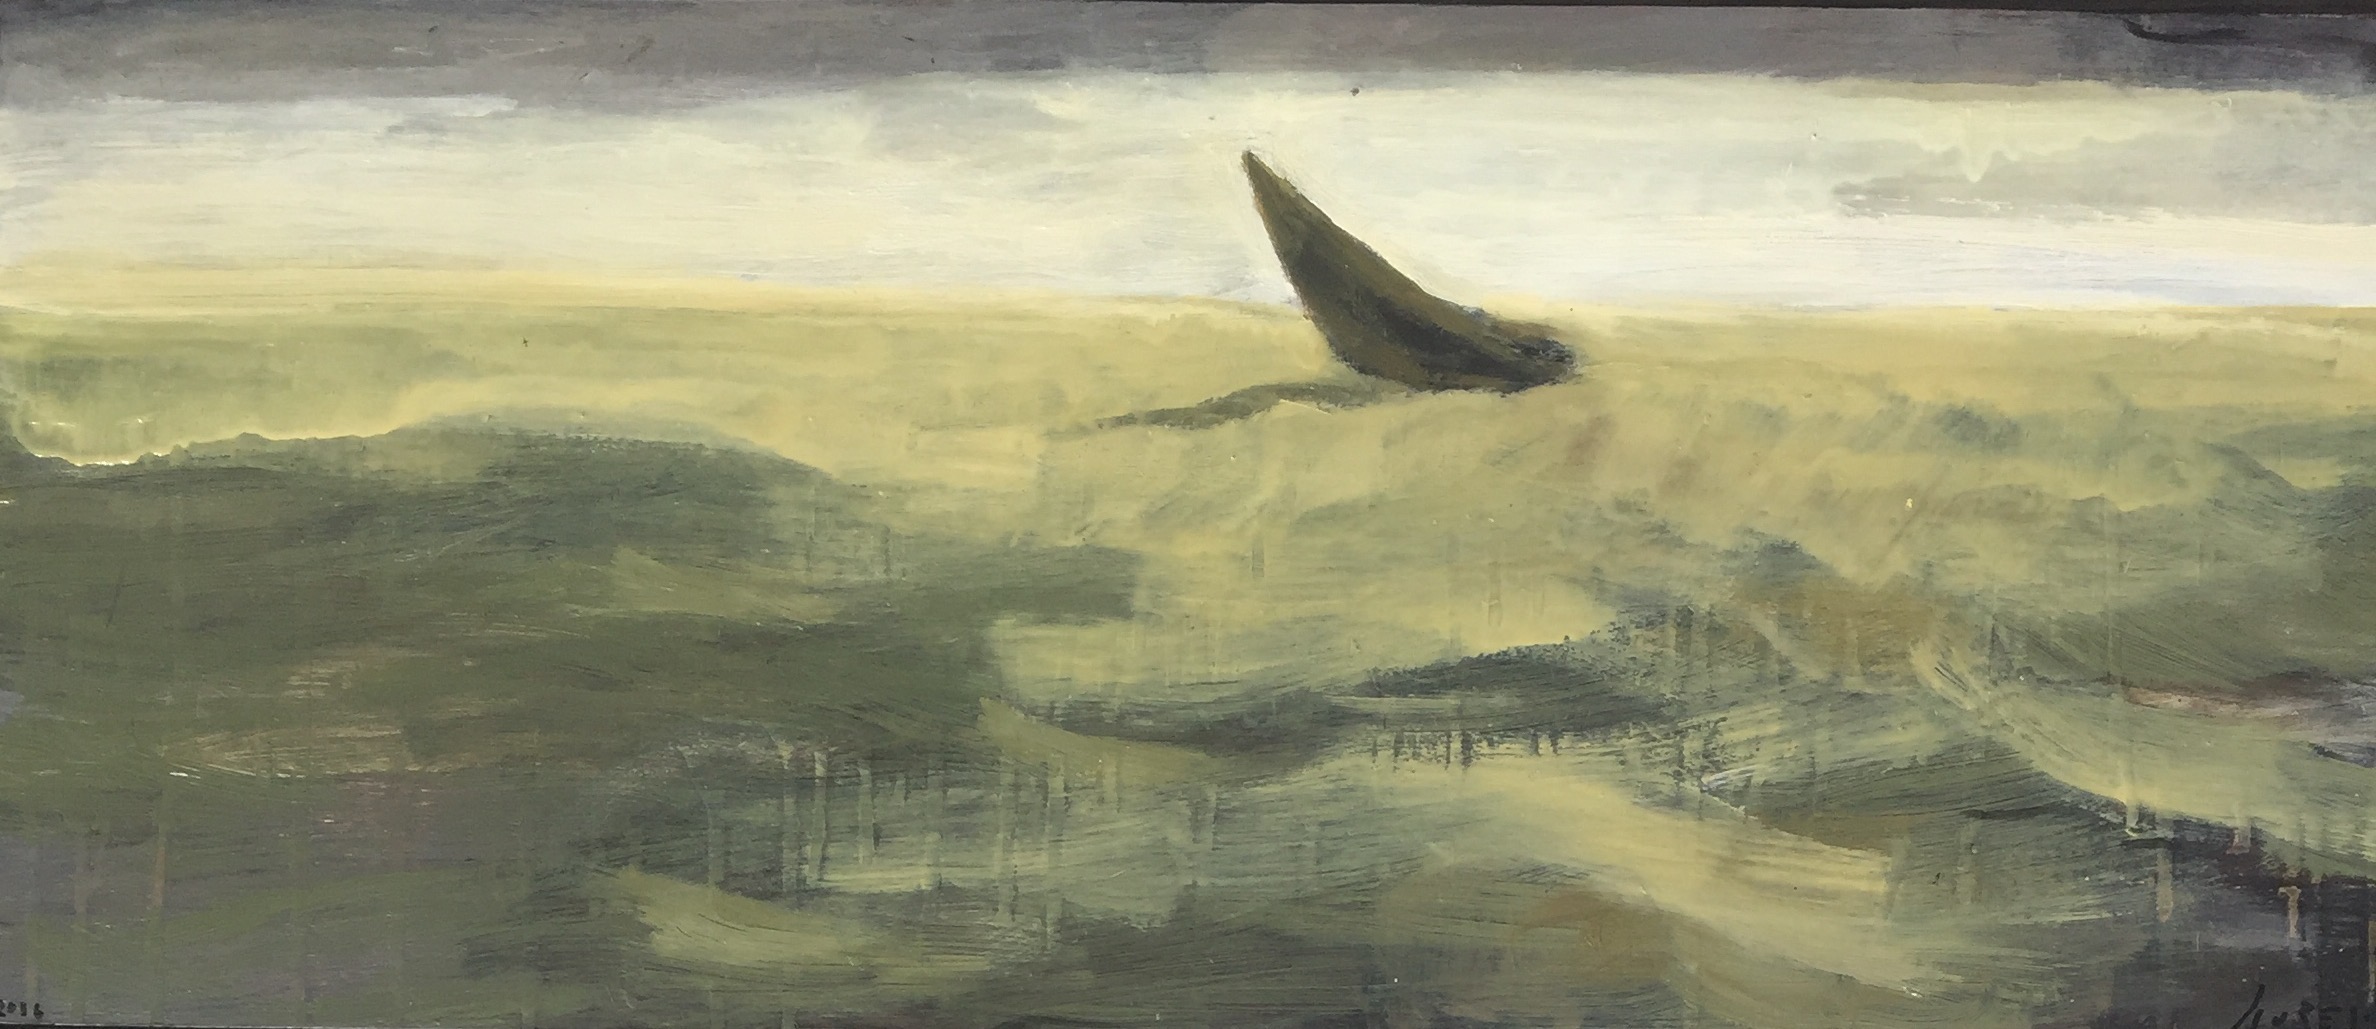 Voilier I, 2017, oIl on canvas, 35 x 15 in, $1,400 